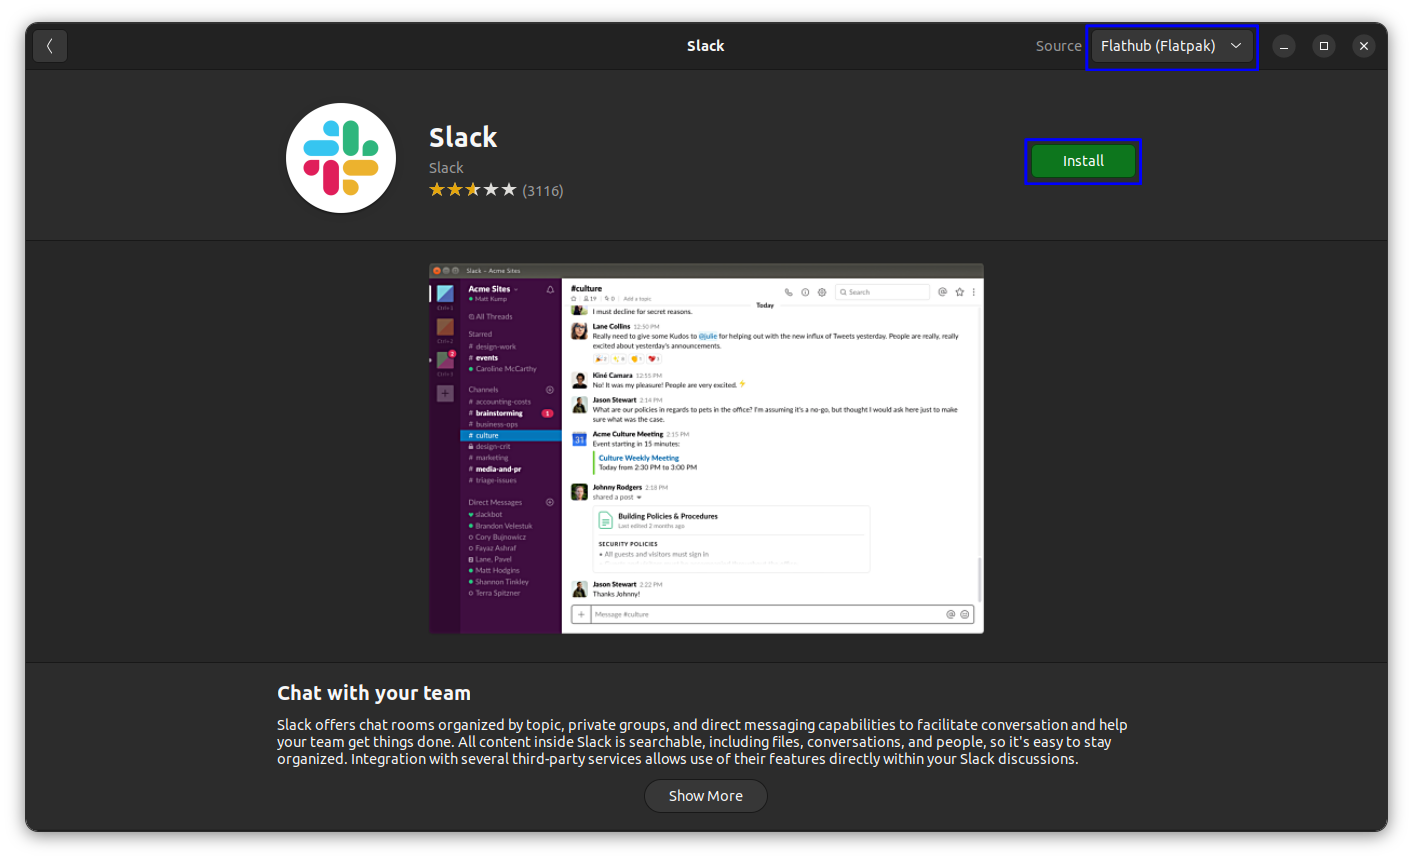 install slack as a flatpak package through gnome software